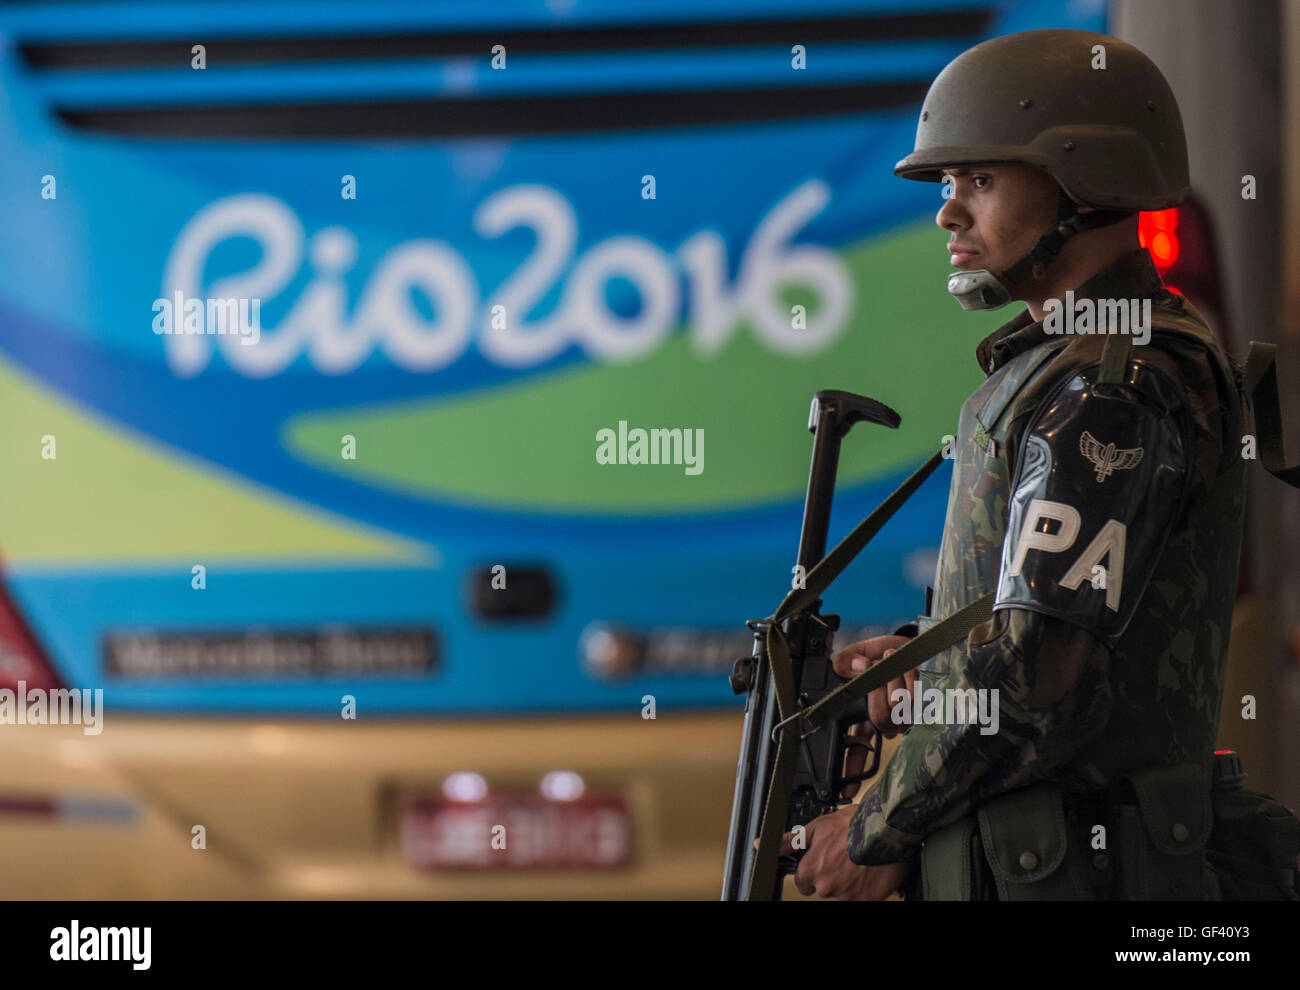 Rio De Janeiro, Brazil. 28th July, 2016. A soldier stands guard at Rio International Airport in Rio de Janeiro, Brazil, July 28, 2016. South America's largest country will deploy 88,000 soldiers and police during the Olympics, more than double the number at the London 2012 Games. © Lui Siuwai/Xinhua/Alamy Live News Stock Photo